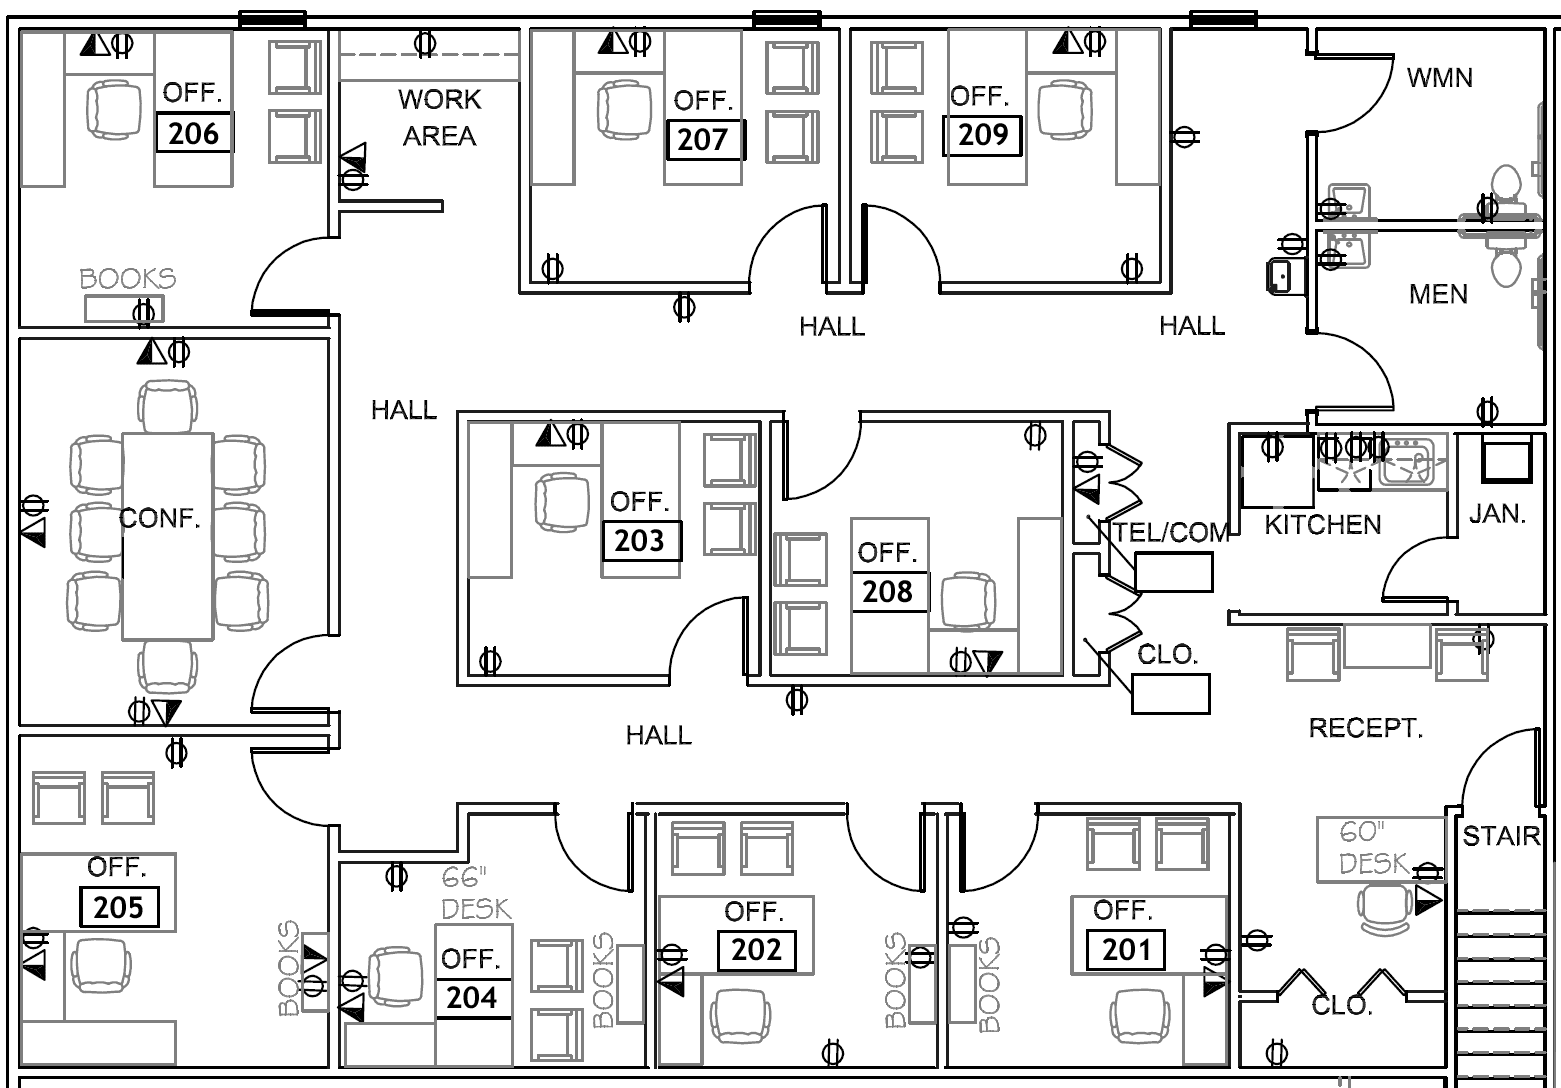 Hall off. План банка в er LC. Схема офиса план open Space. Floor Plan with Dimensions and Furniture. Professional Furniture Layout Plan drawing.